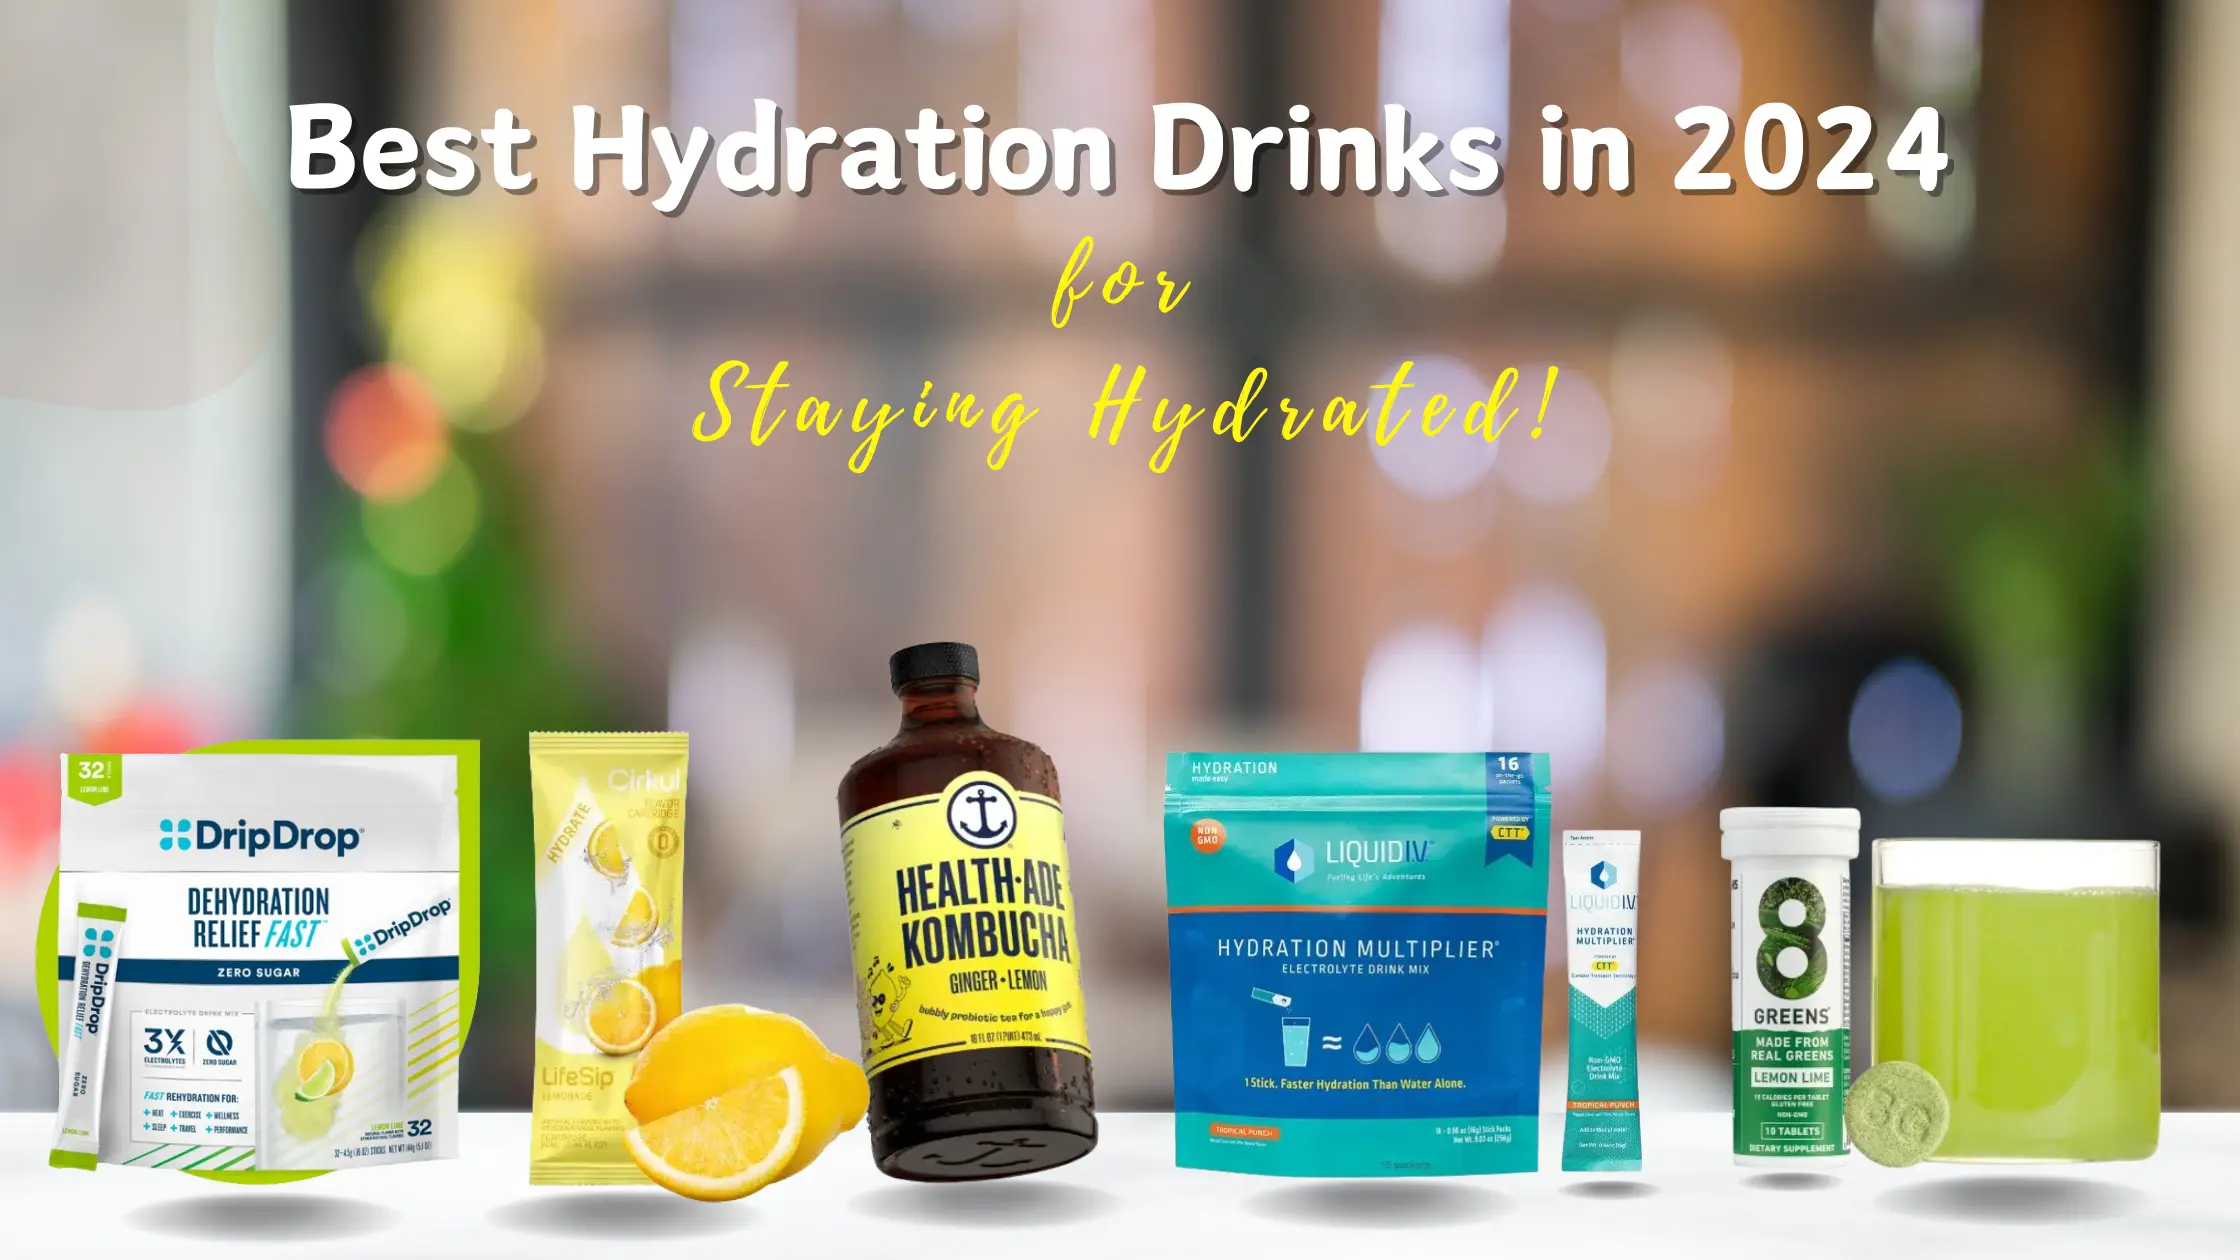 Top Picks of the Best Hydration Drinks in 2024